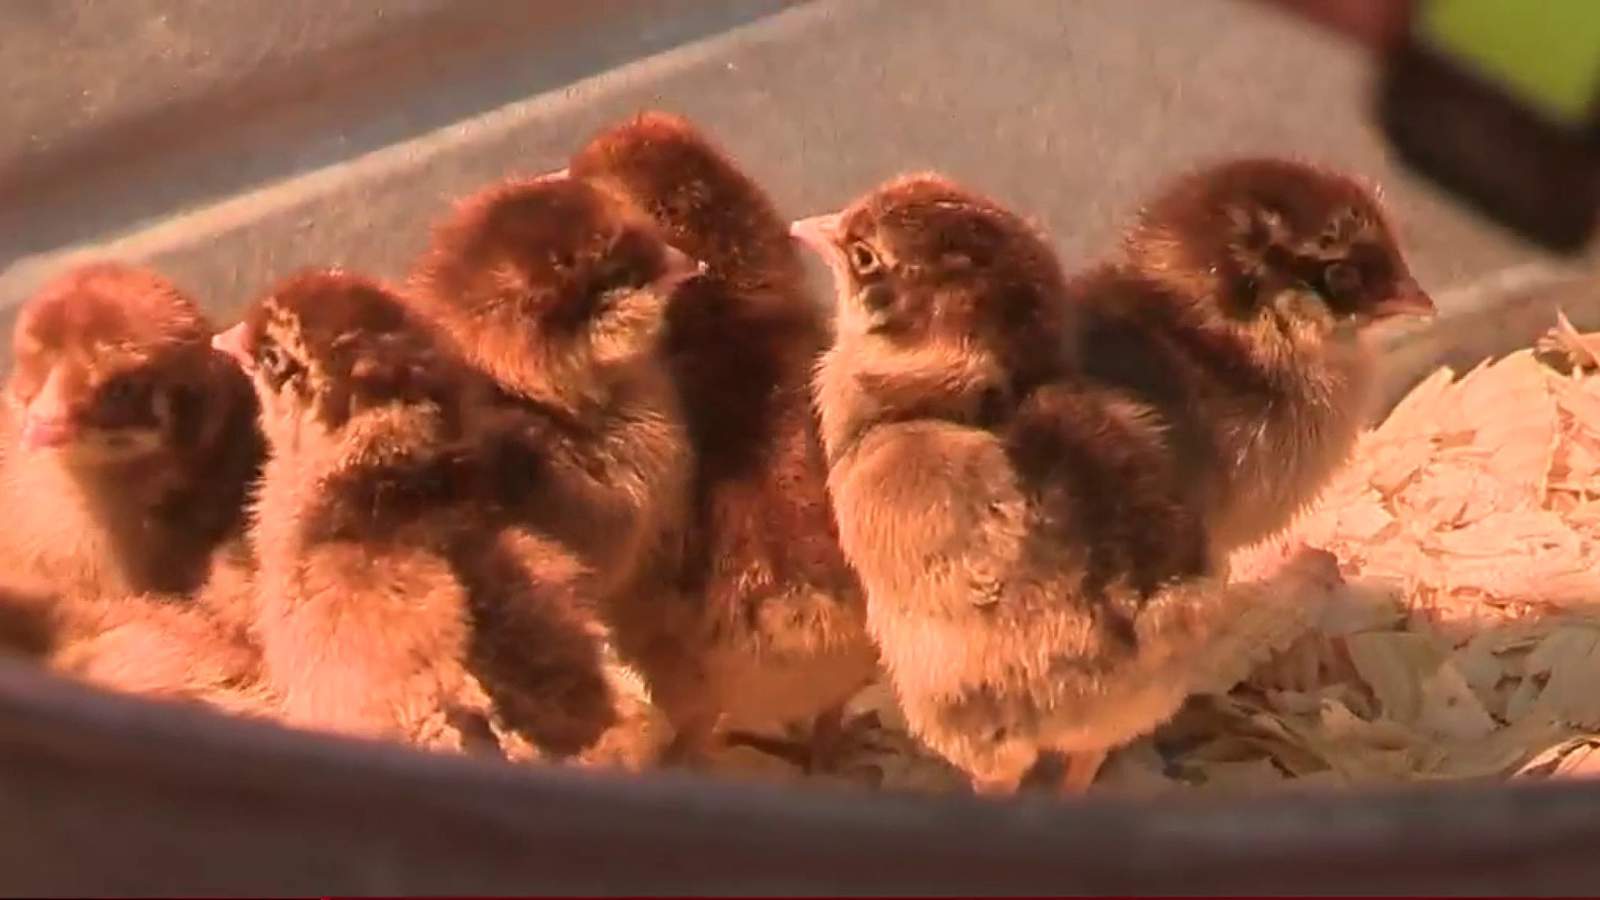 More people putting all their eggs in one basket by trying out backyard chicken farming